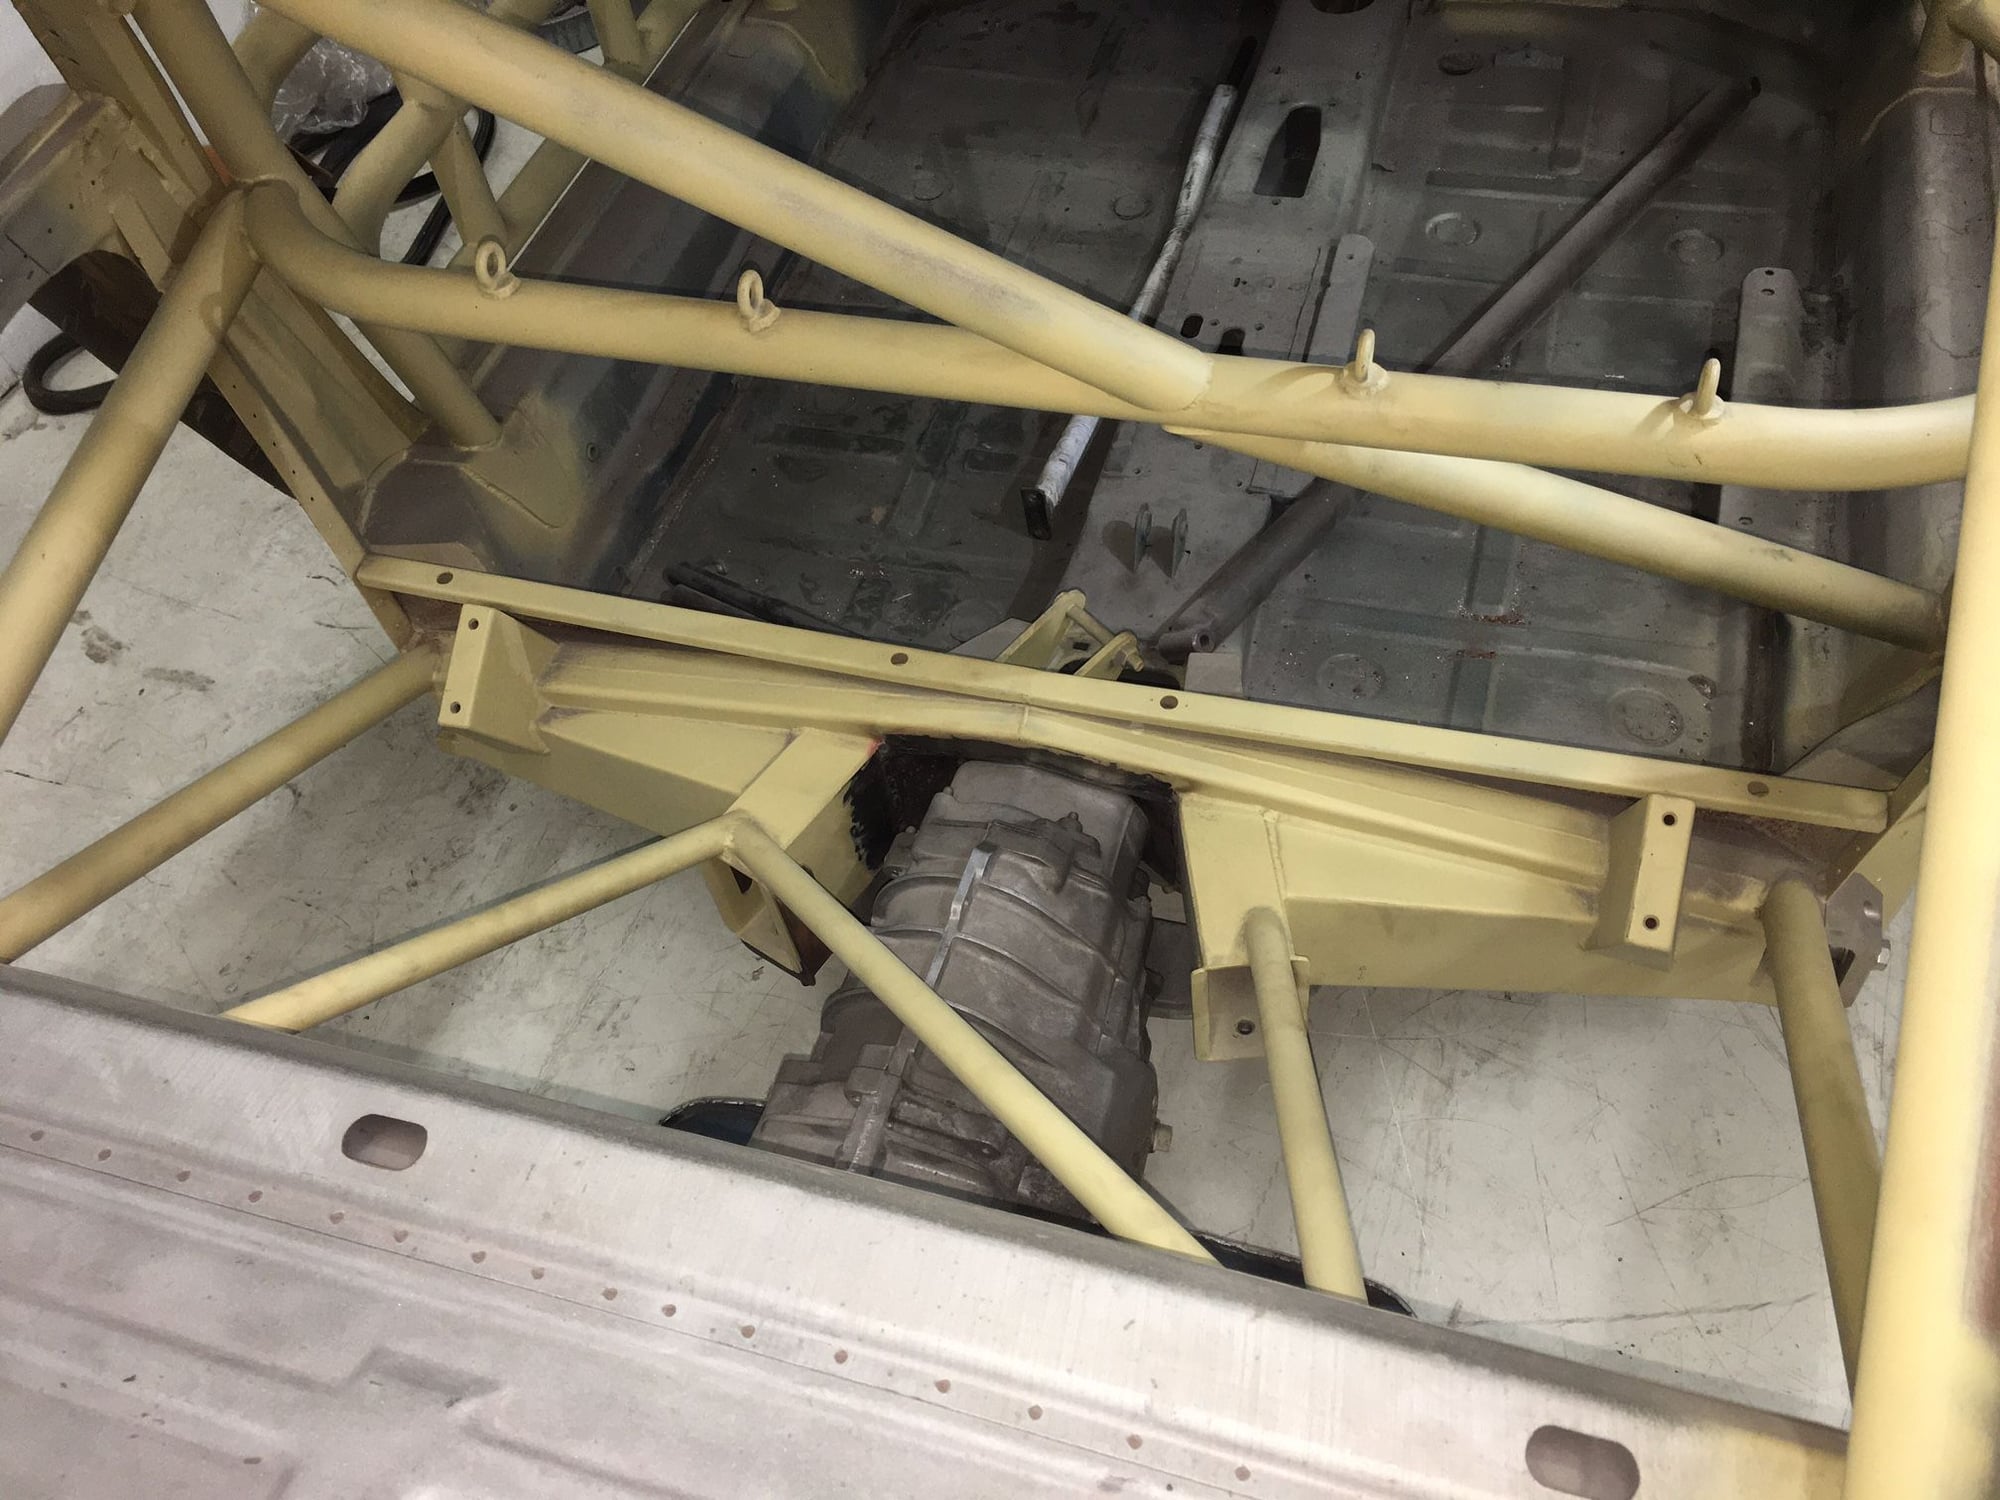 1983 Porsche 911 - 1983 911 FABCAR Tube frame project - Used - VIN WP0AA0913DS120379 - 2WD - Manual - Coupe - Joliet, IL 60436, United States